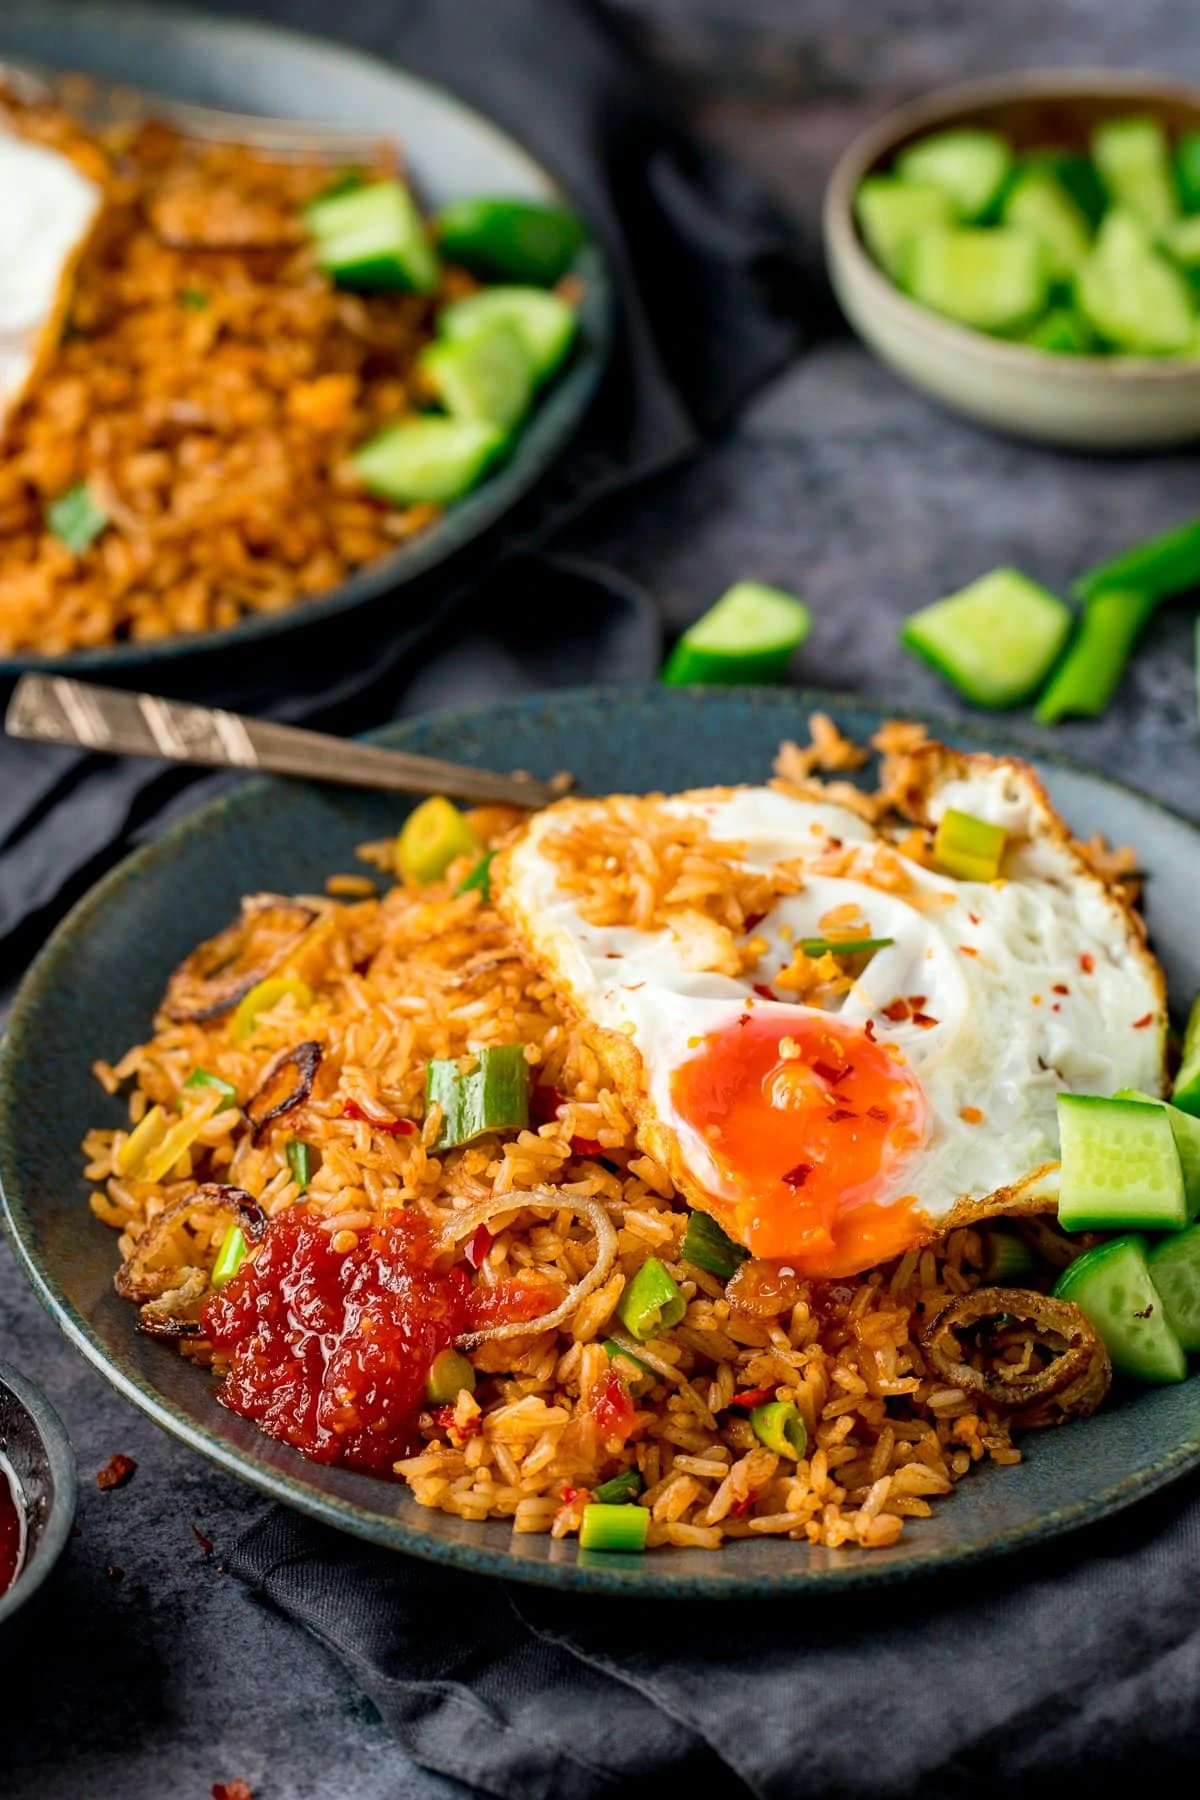 nasi goreng rice on a plate, with a fried egg, chilli sauce and cucumber